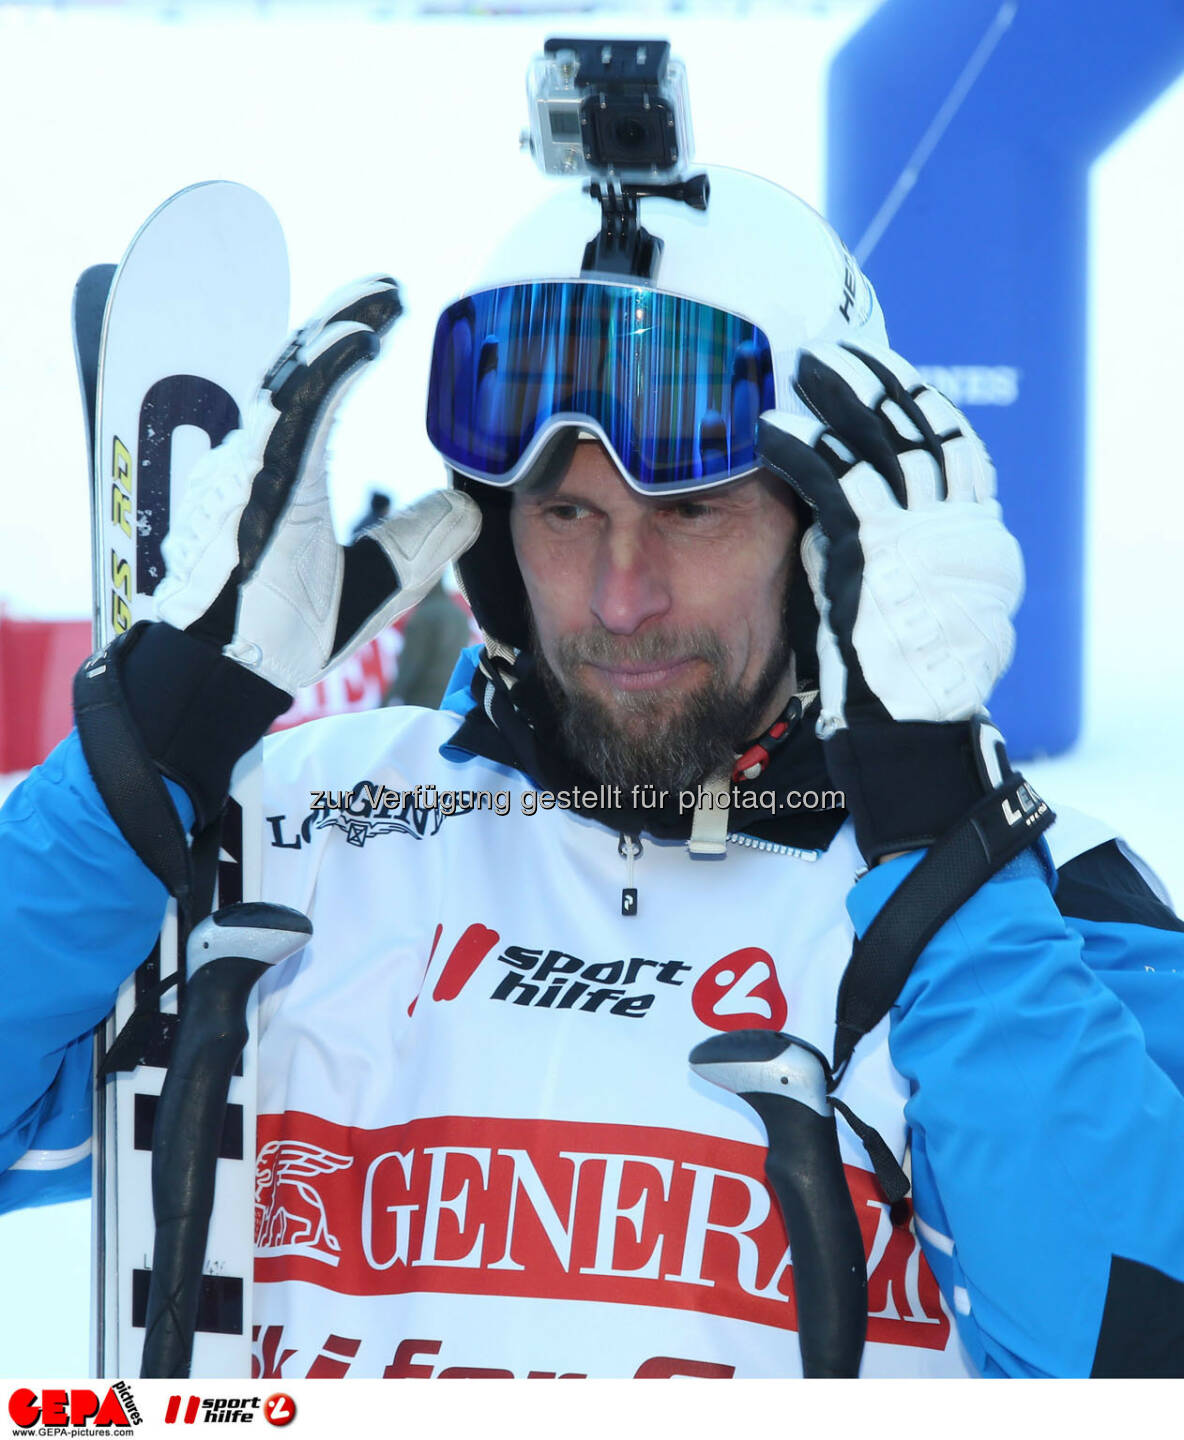 Ski for Gold Charity Race. Image shows Marco Buechel. Photo: GEPA pictures/ Harald Steiner